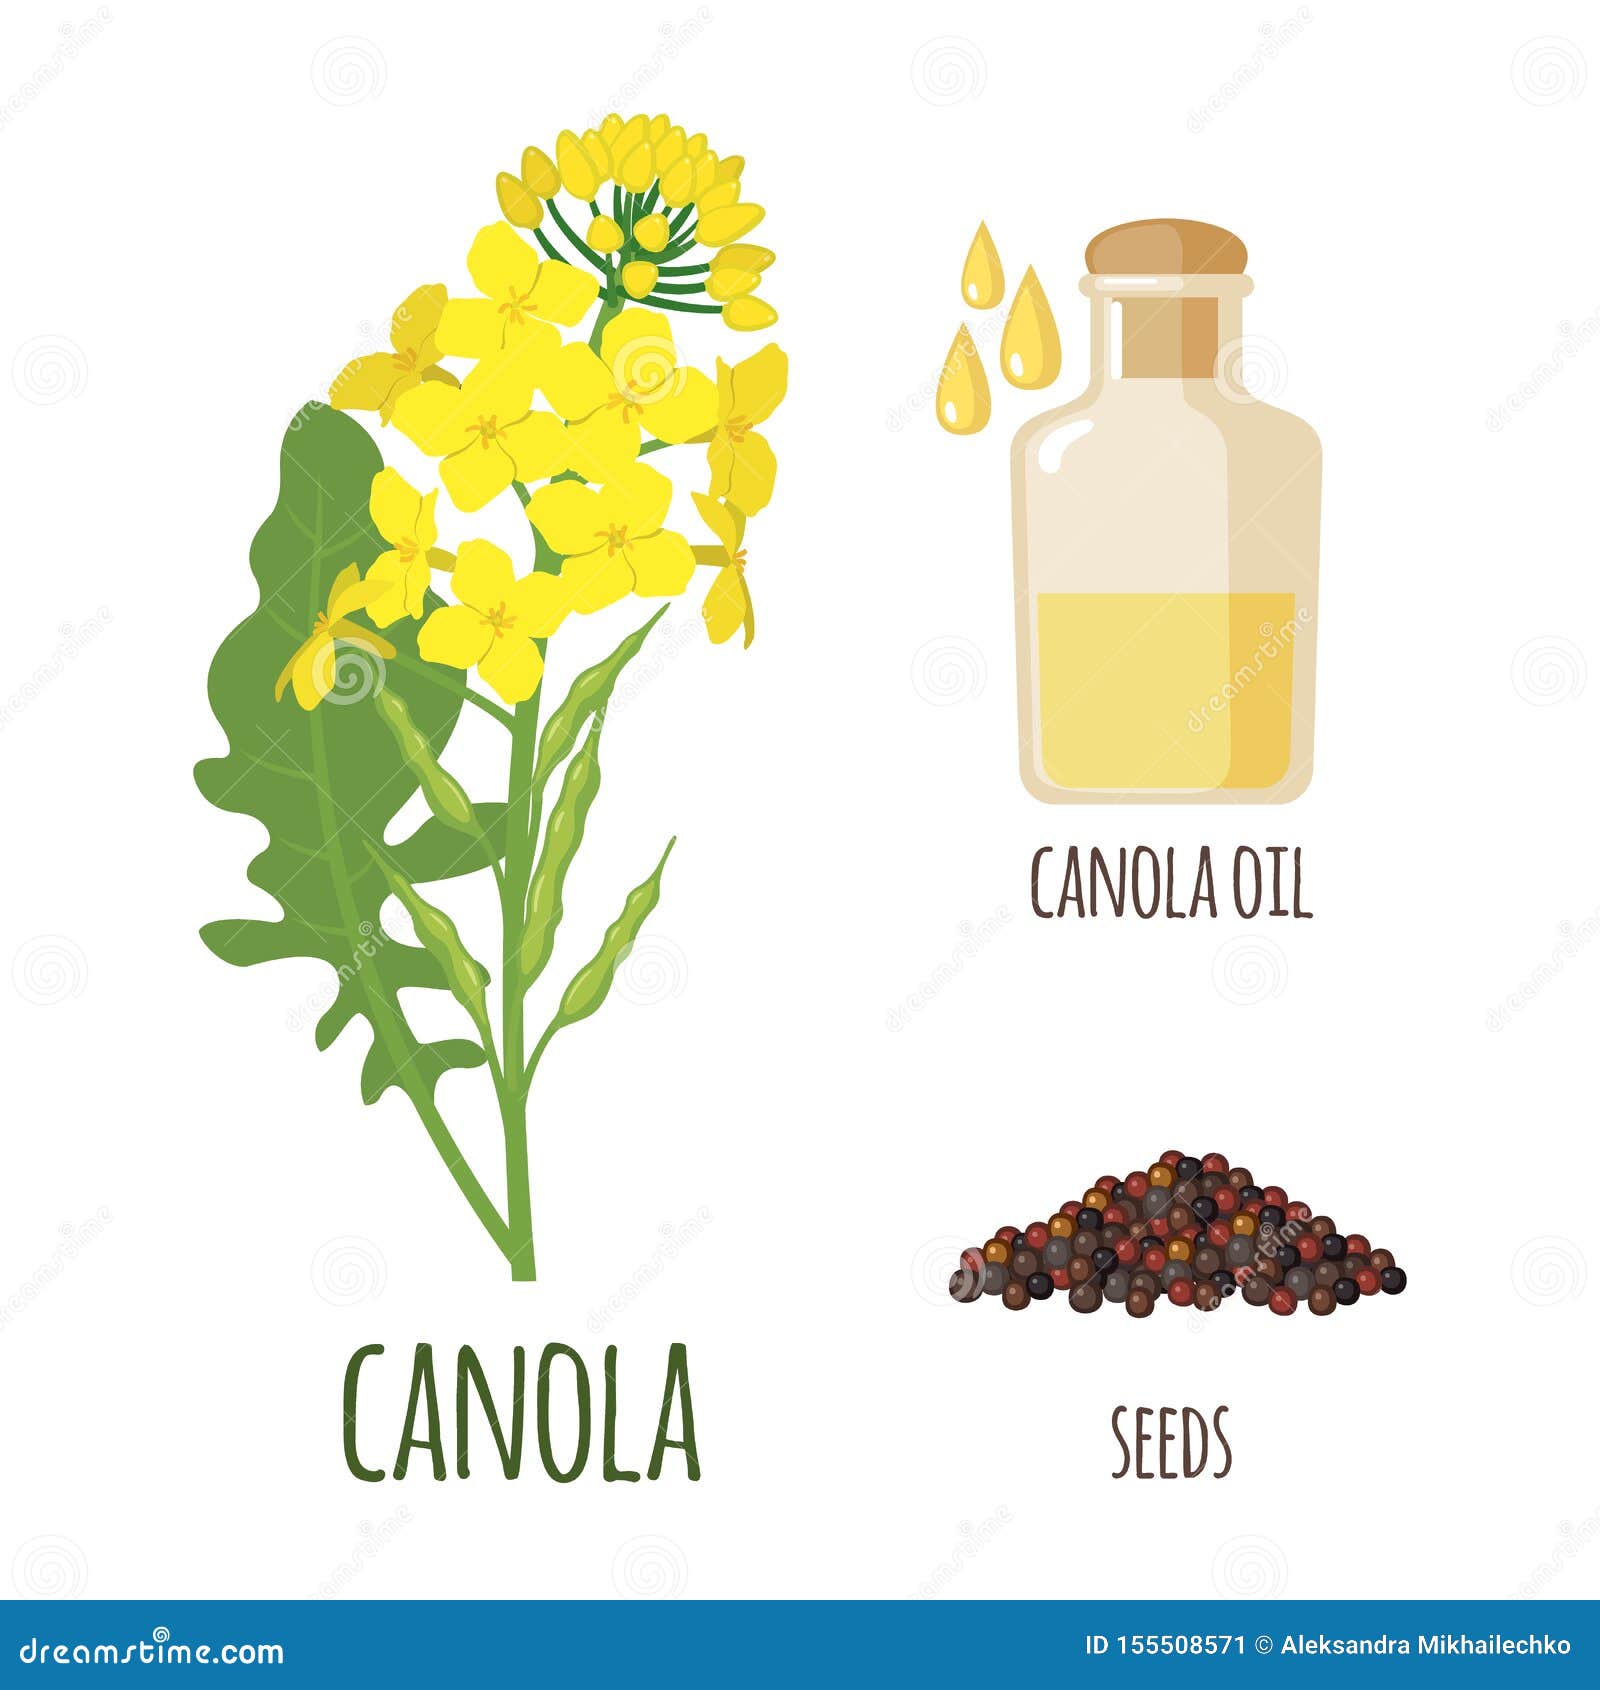 canola flowers with pod and seeds in flat style